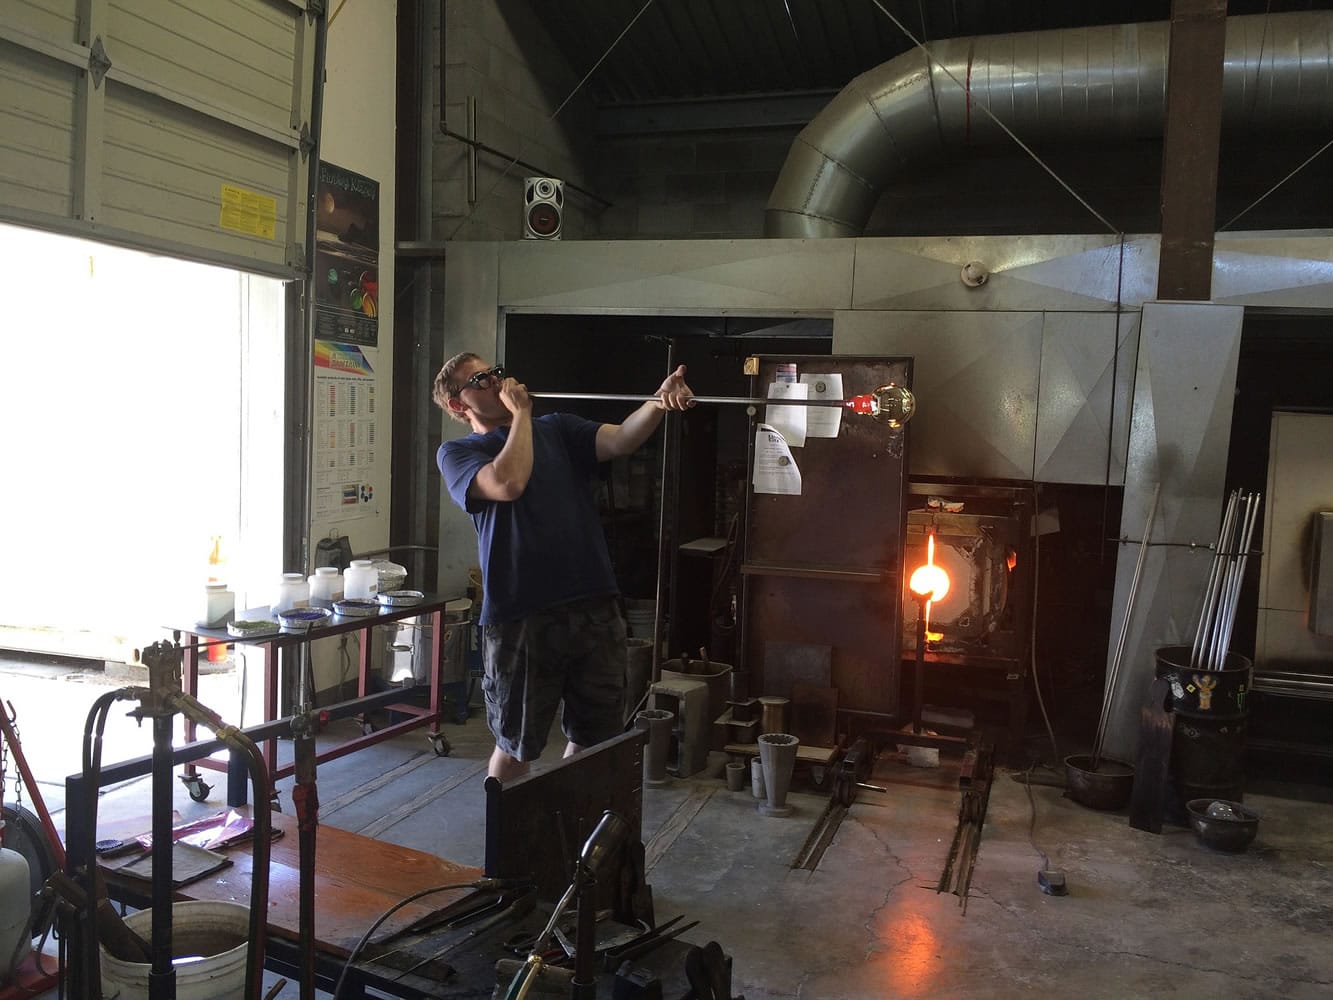 Glassblowing demonstrations are offered at Gathering Glass studio in Ashland, Ore.